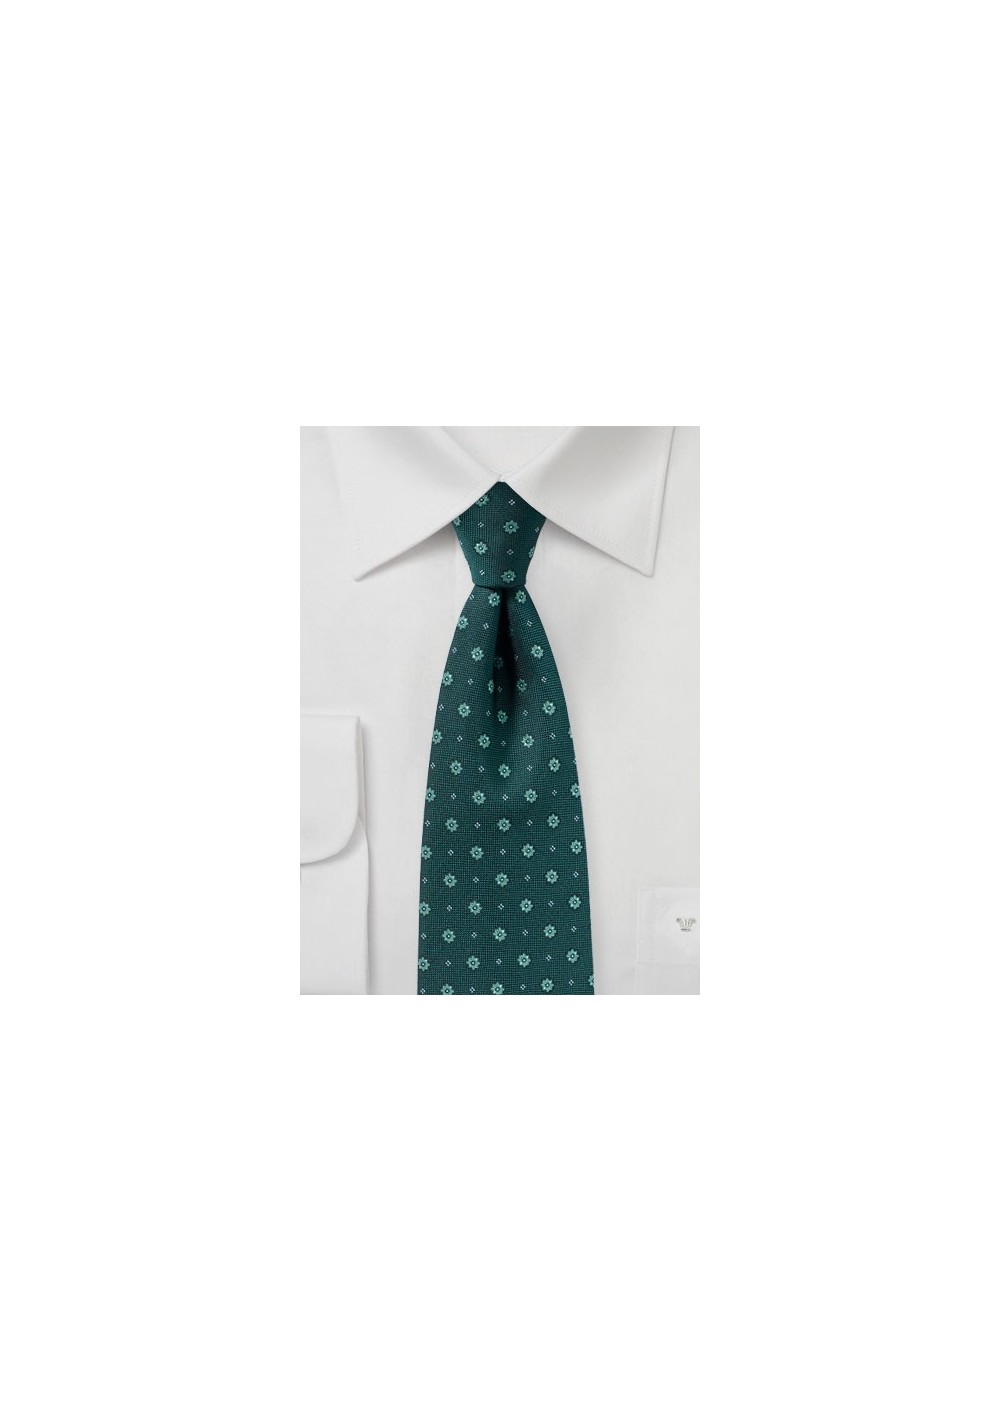 Woven Floral Tie in Hunter Green